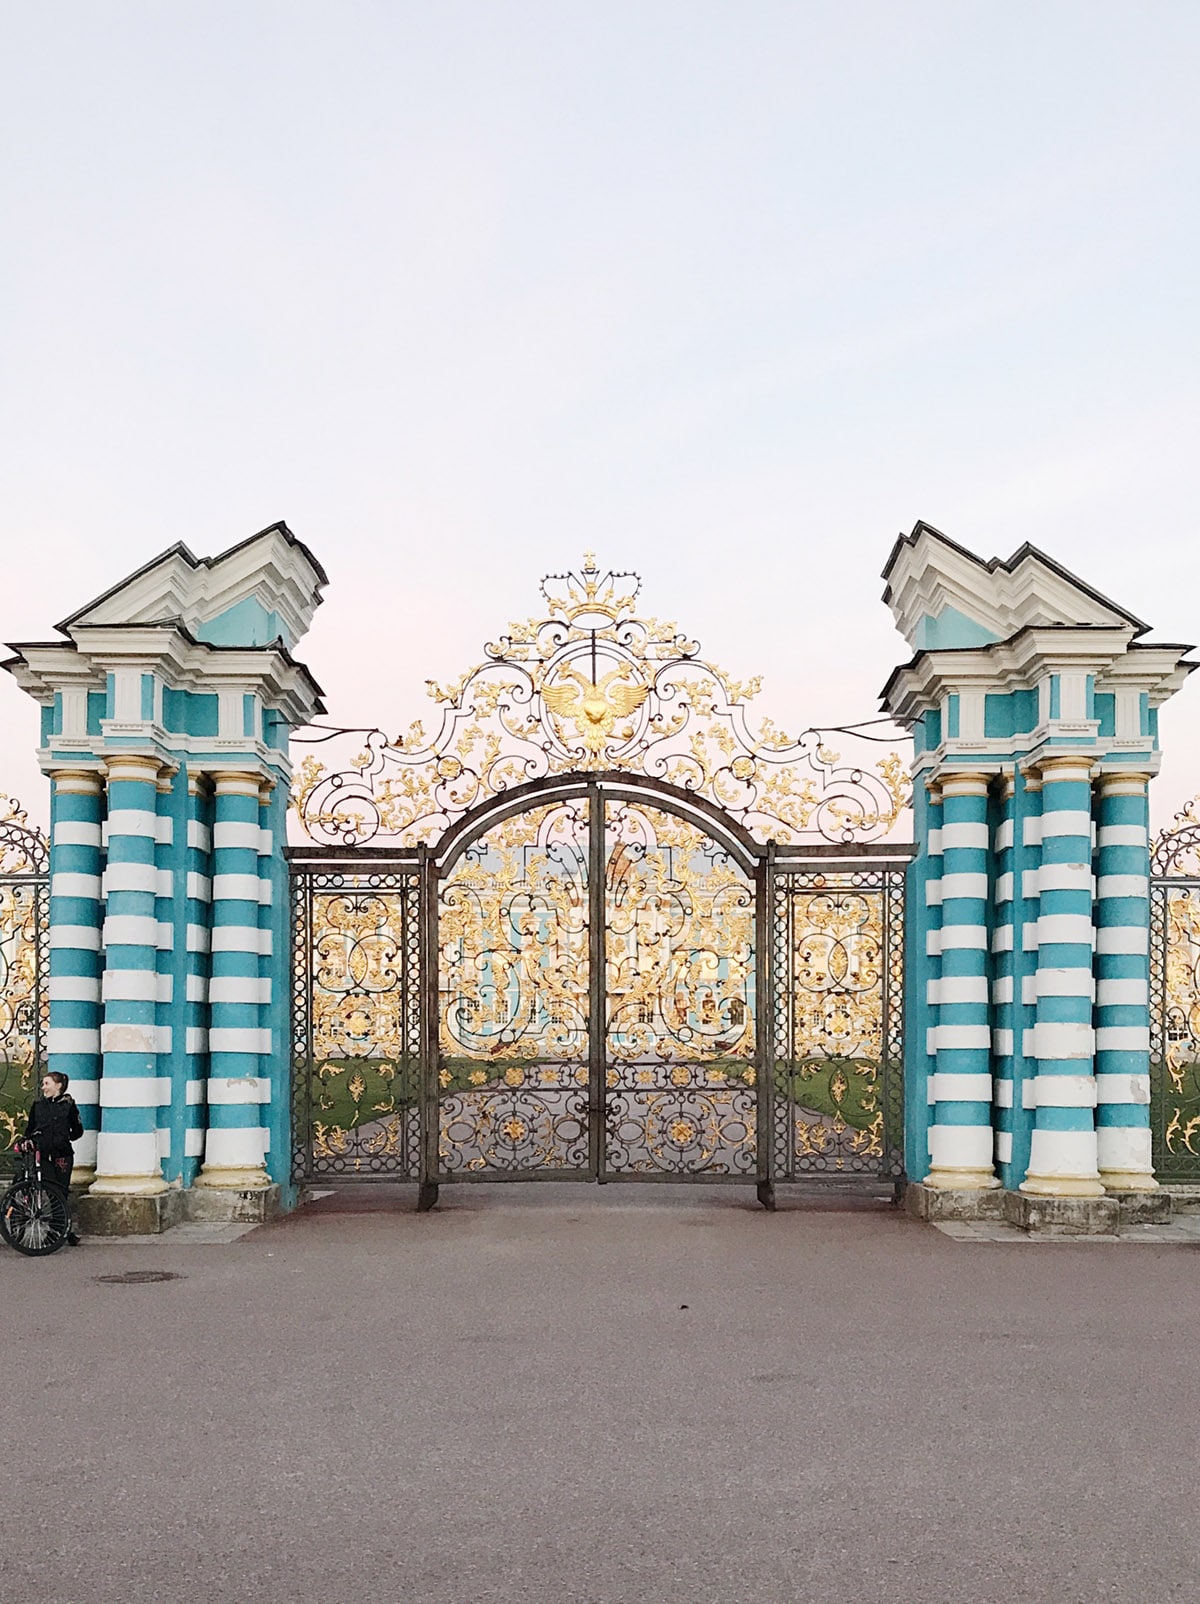 the blue and white striped gates to Catherine's Palace | St Petersburg travel diary on coco kelley